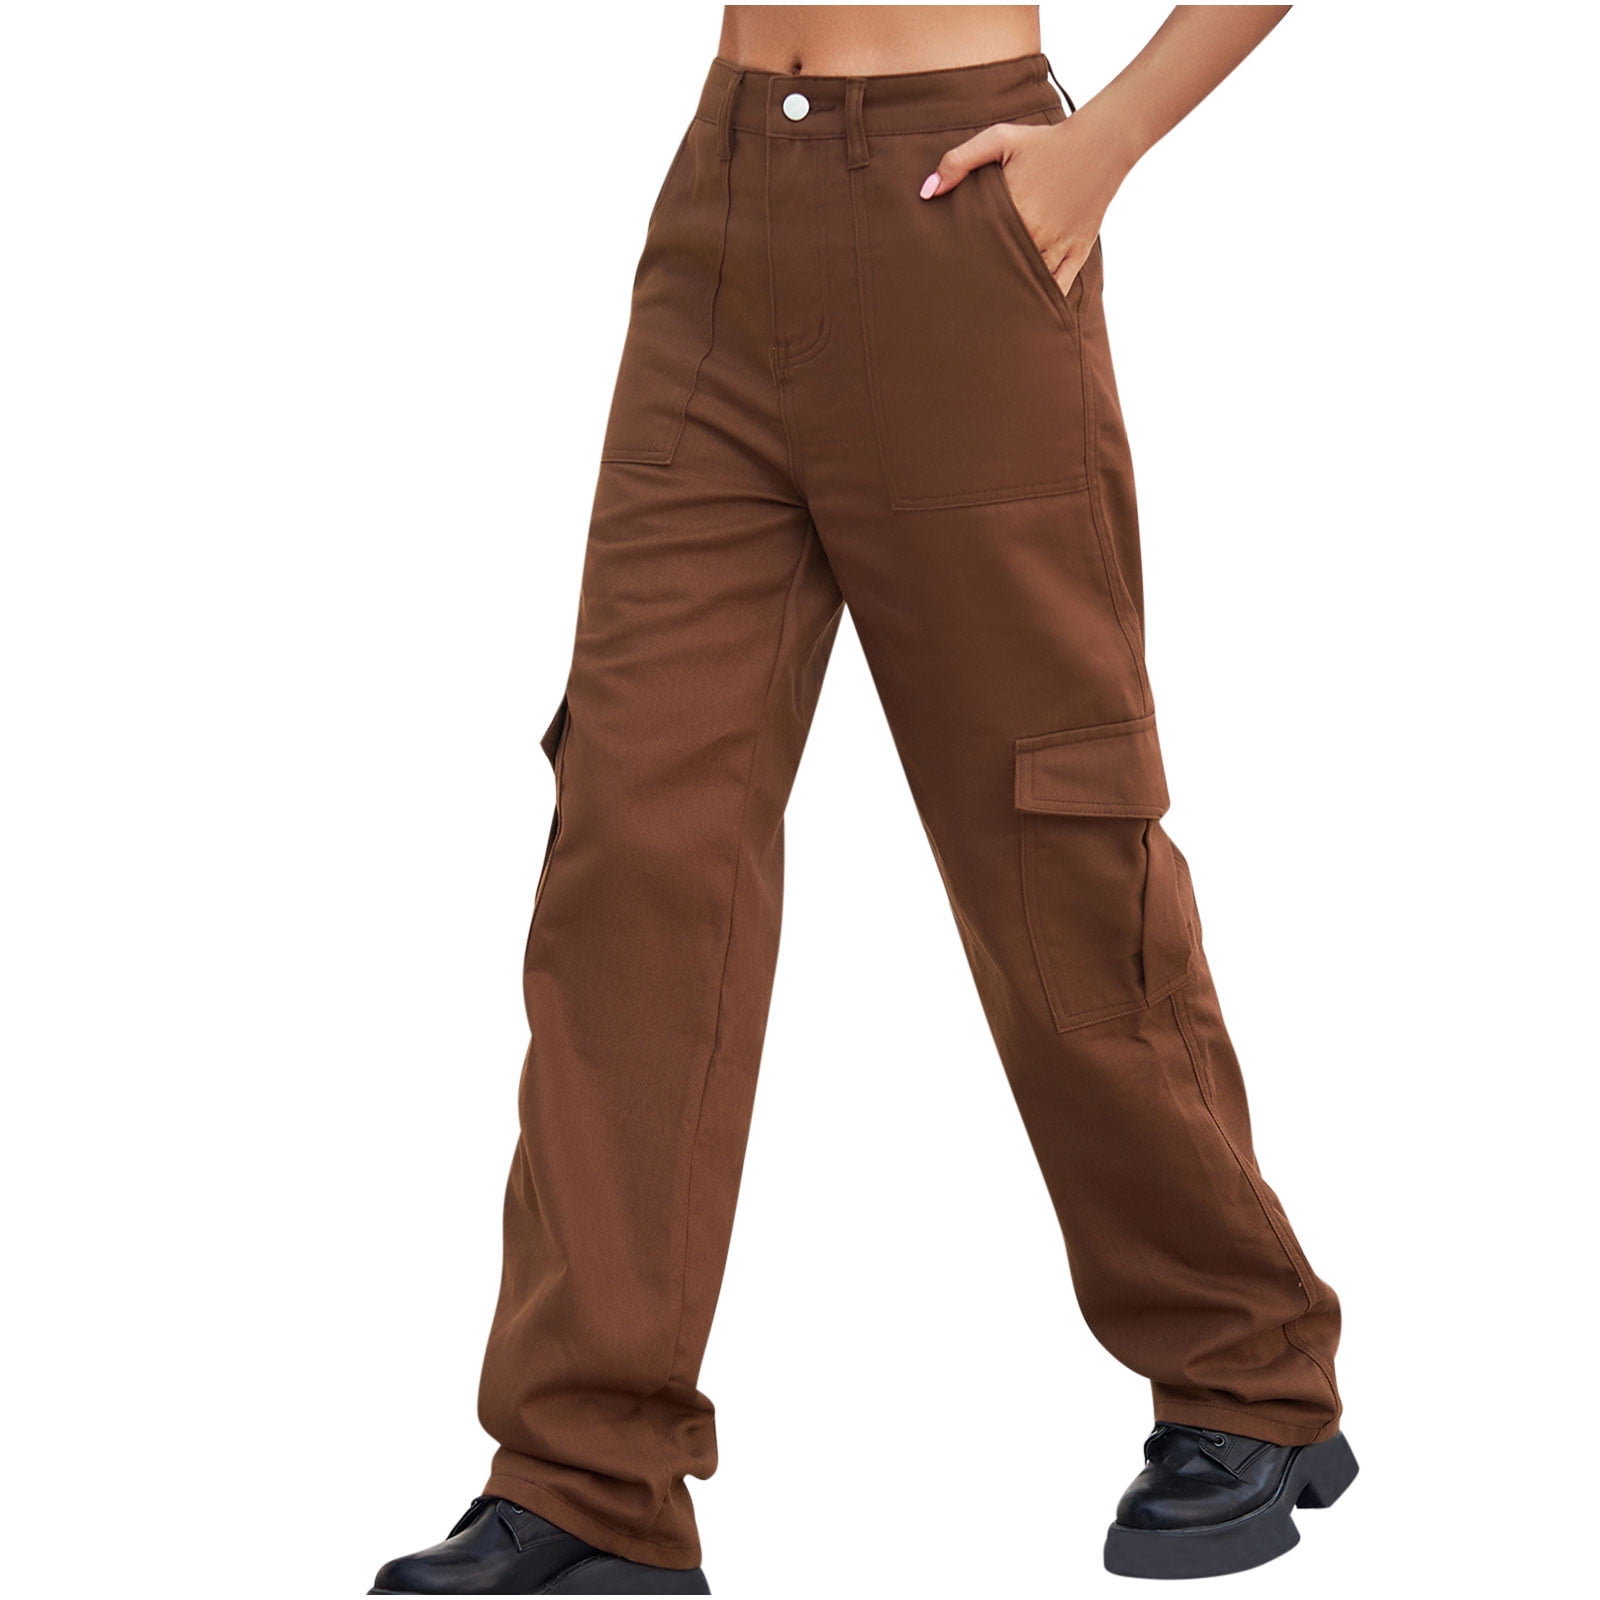 Cargo Pants Women Solid Wide Leg Hippie Punk Trousers Streetwear Jogger Pocket  Loose Overalls Long Pants Activewear Trousers Hiking Pants Women Combat  Military Utility Pants 